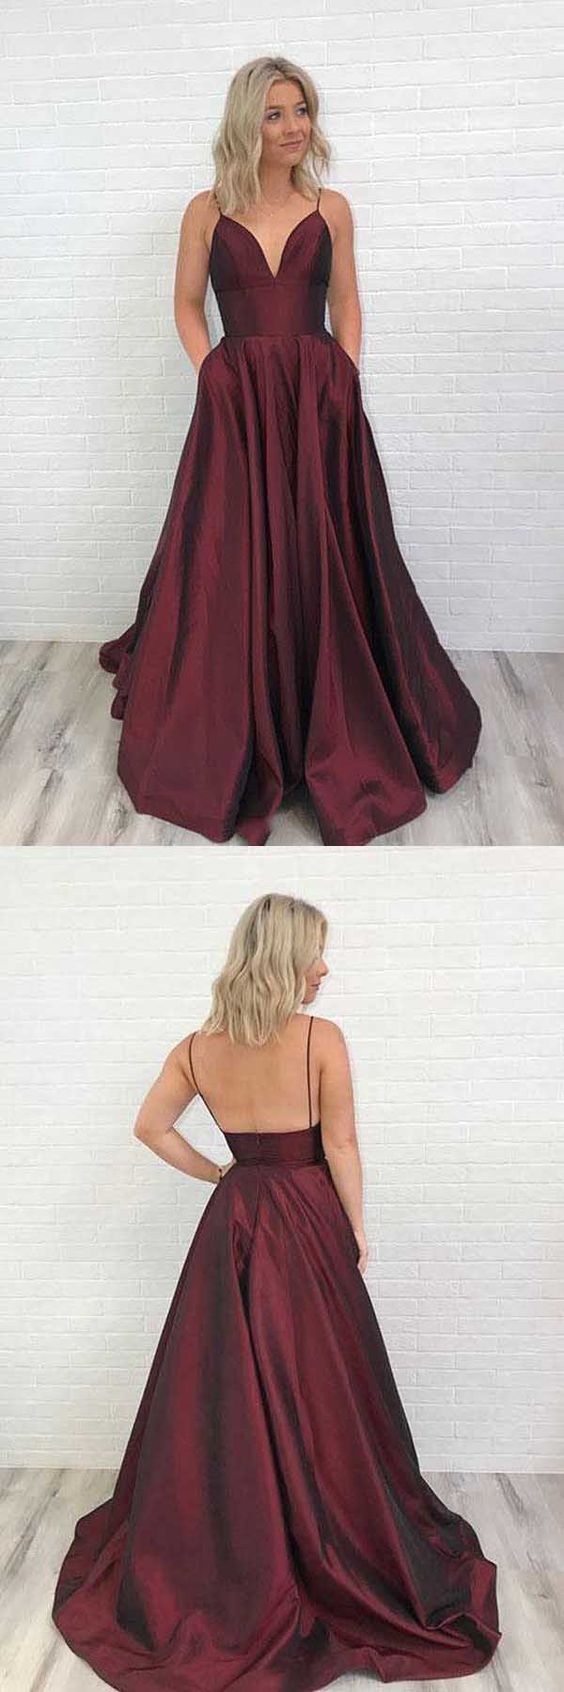 Burgundy Backless Graduation Prom Dress with Pockets, GDC1049-Dolly Gown